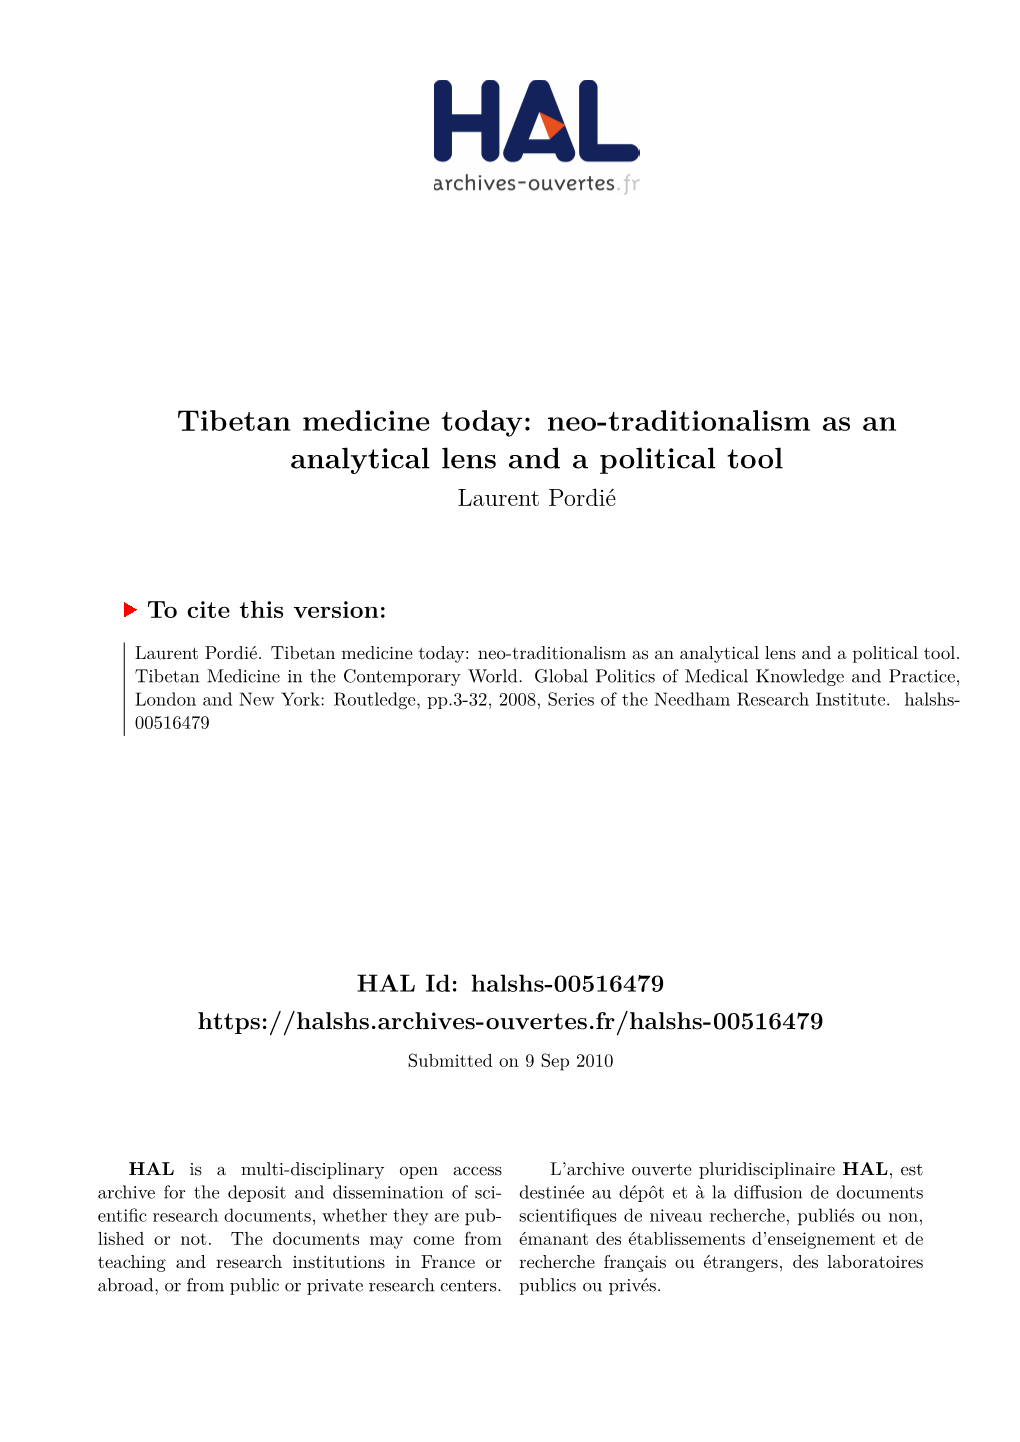 Tibetan Medicine Today: Neo-Traditionalism As an Analytical Lens and a Political Tool Laurent Pordié